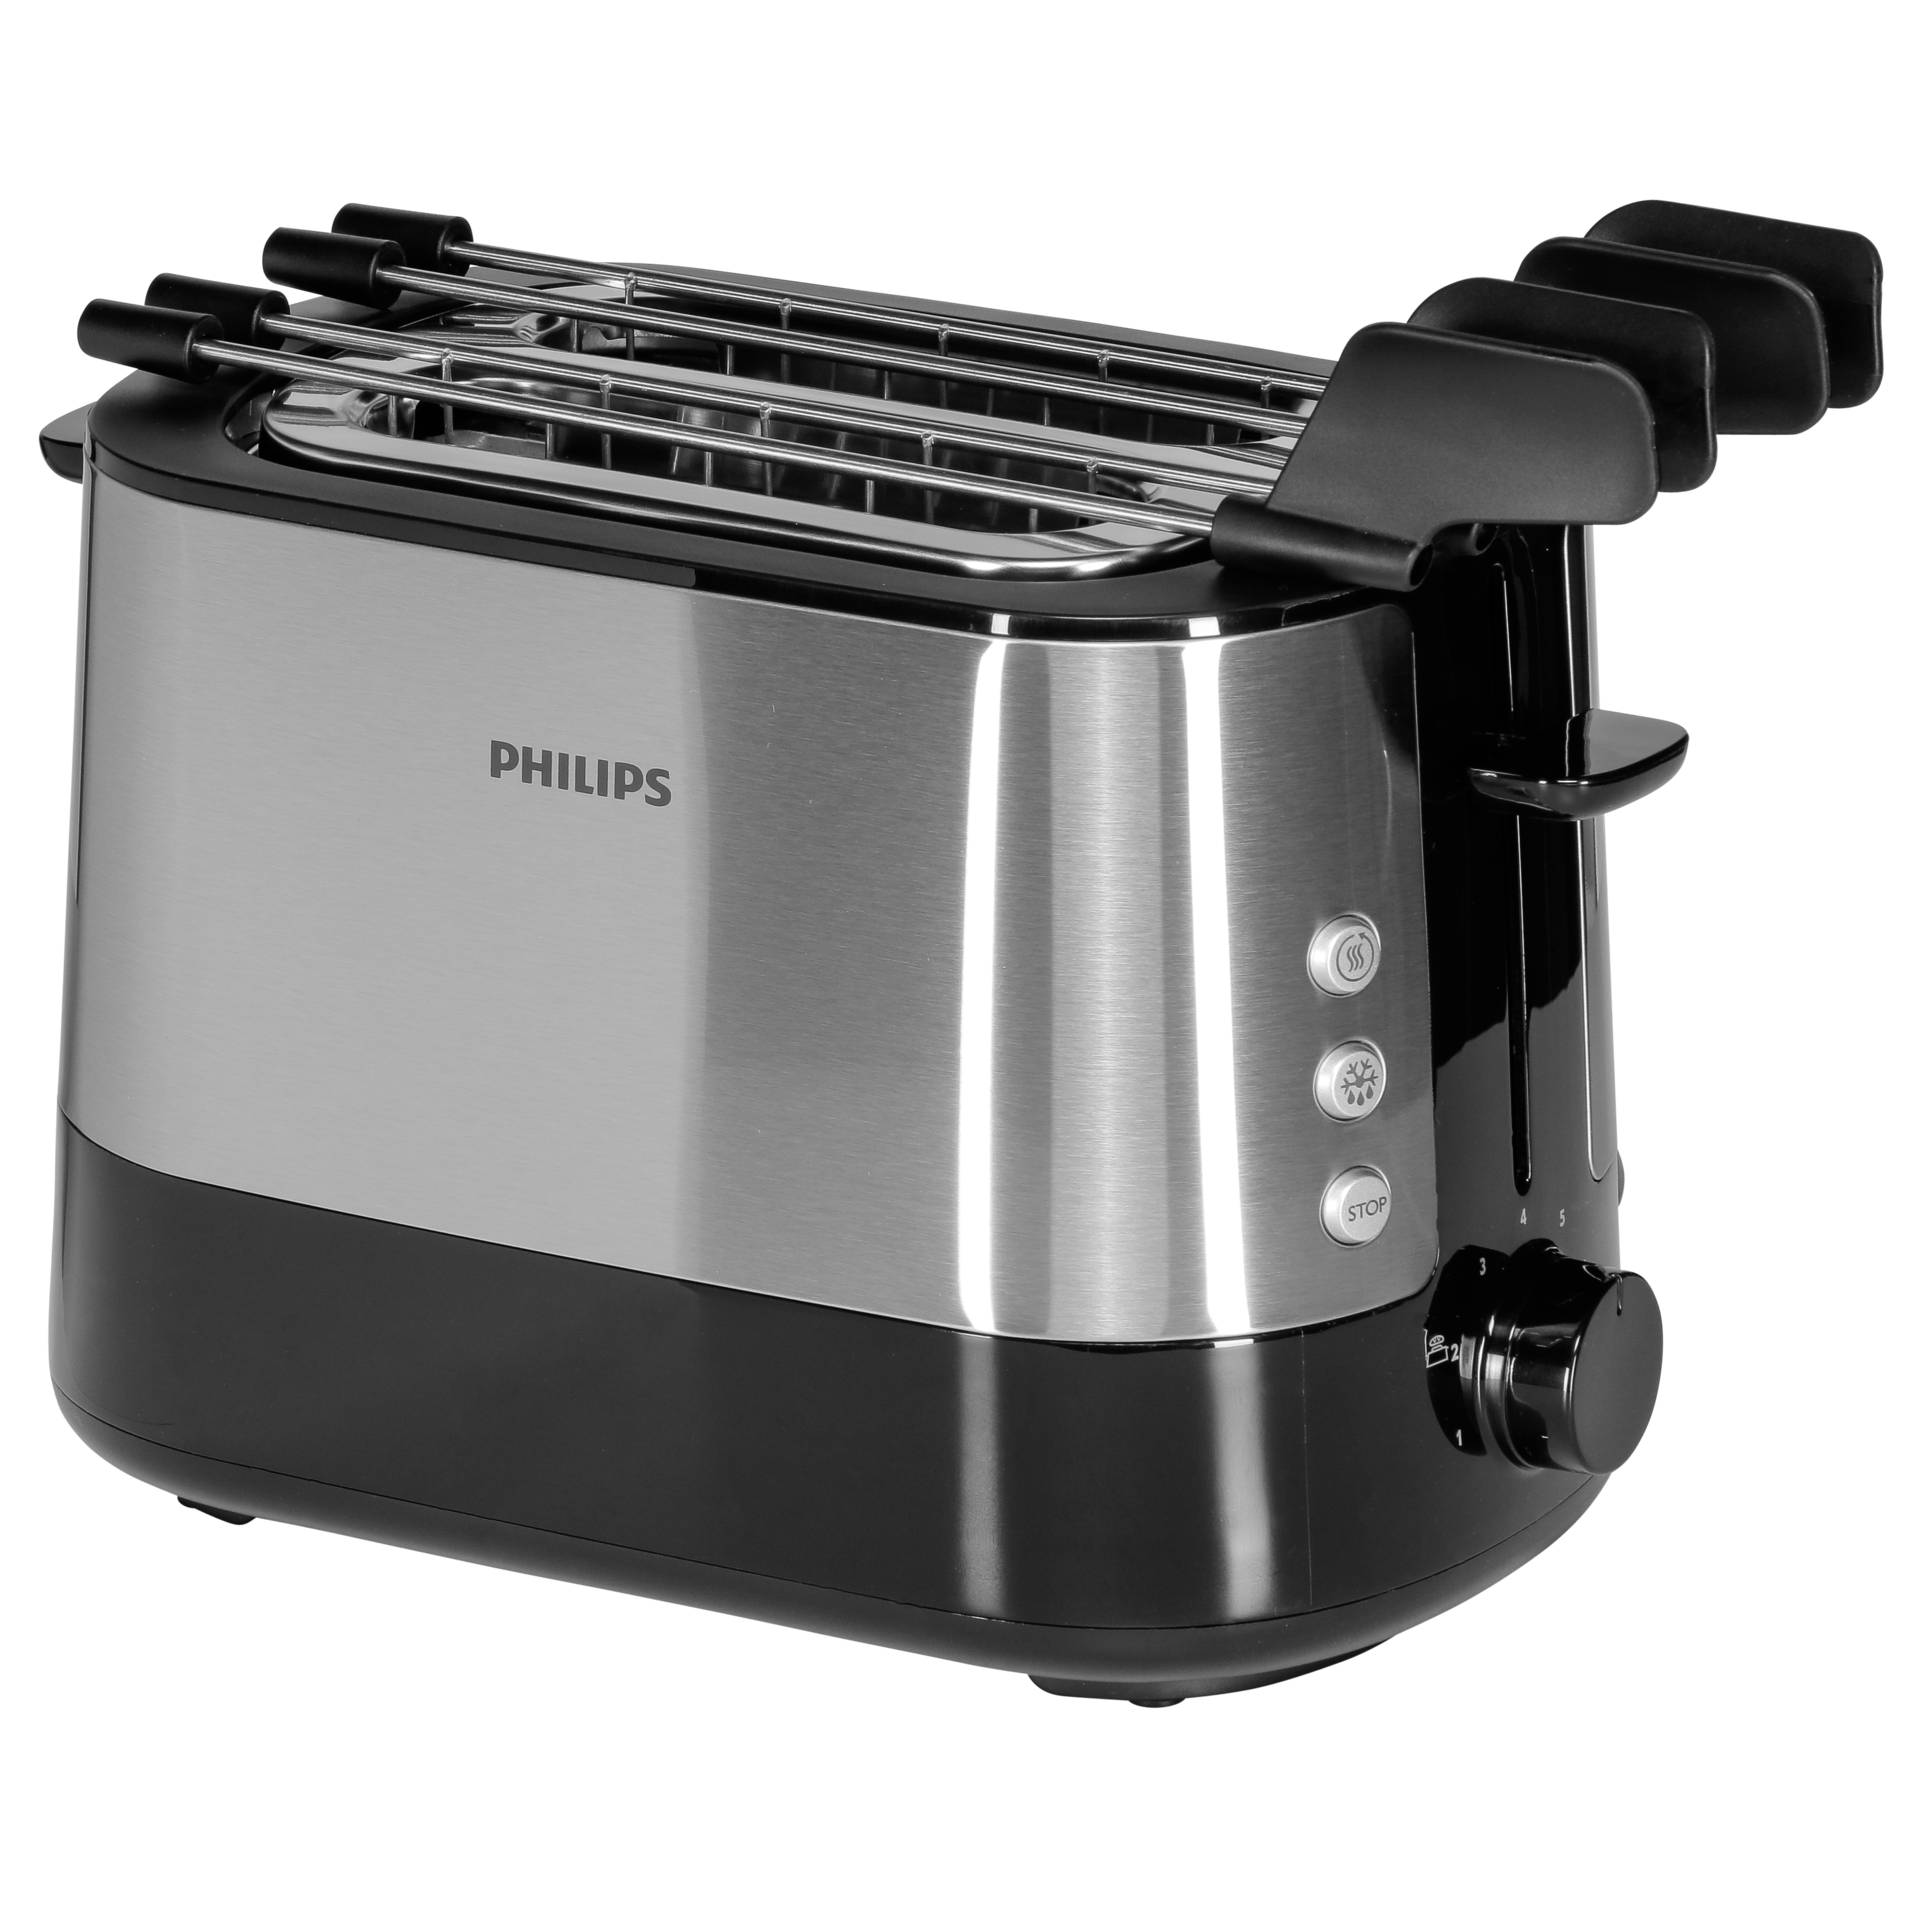 Philips HD2639/90 Toaster 